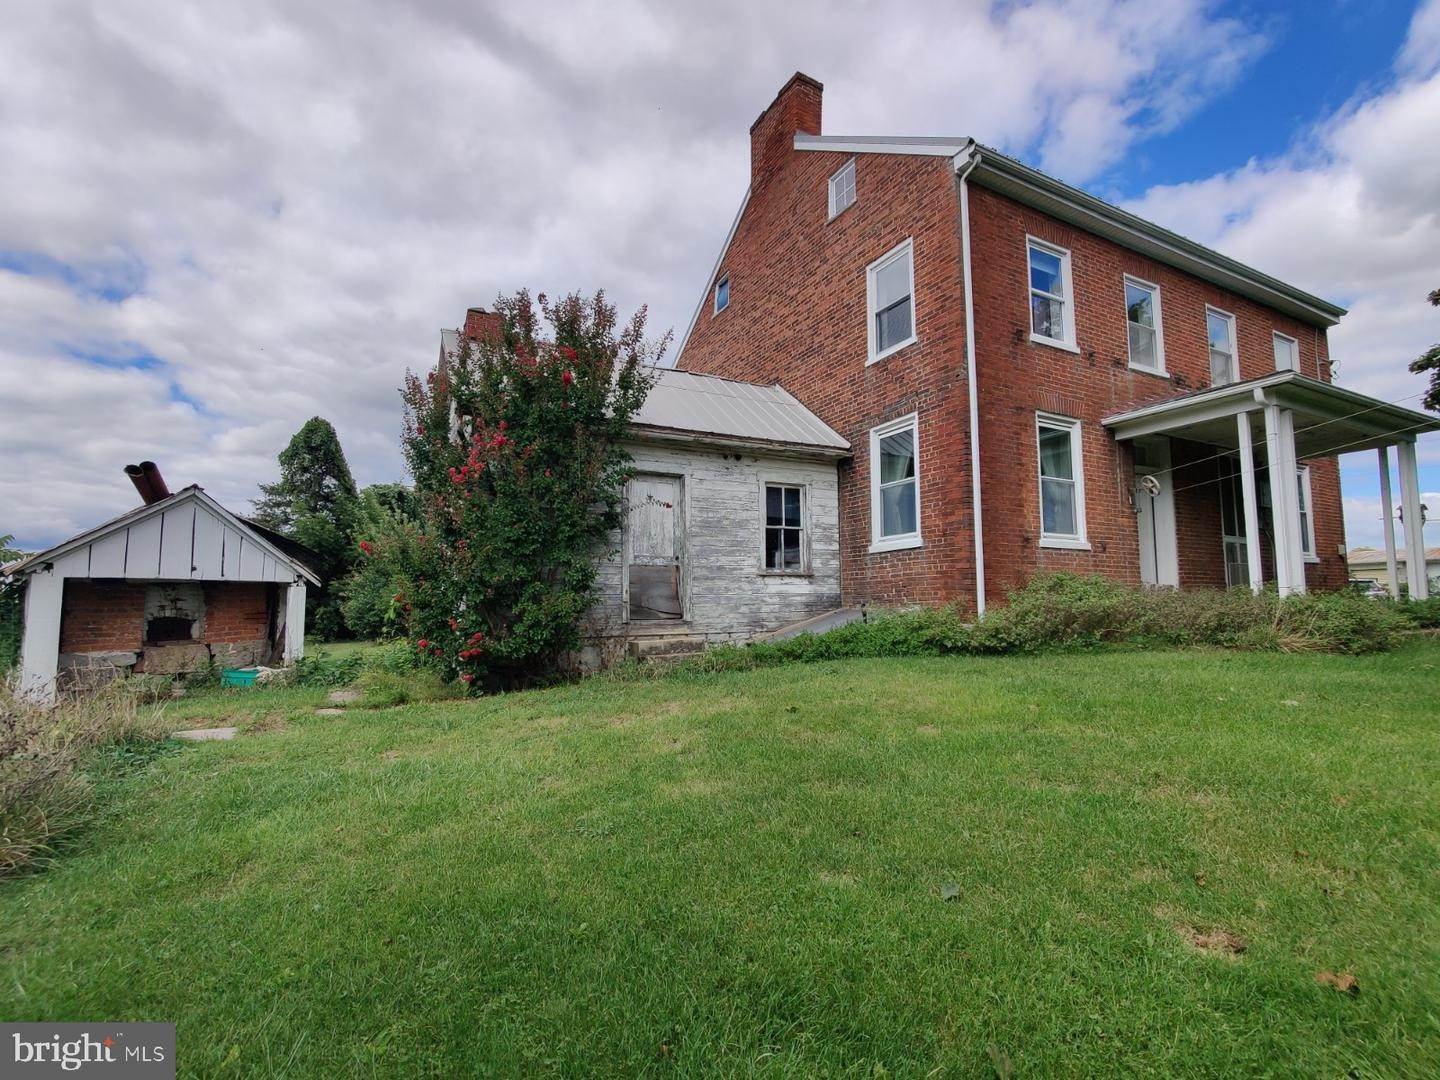 14. Commercial for Sale at 226 MILNOR ROAD Greencastle, Pennsylvania 17225 United States